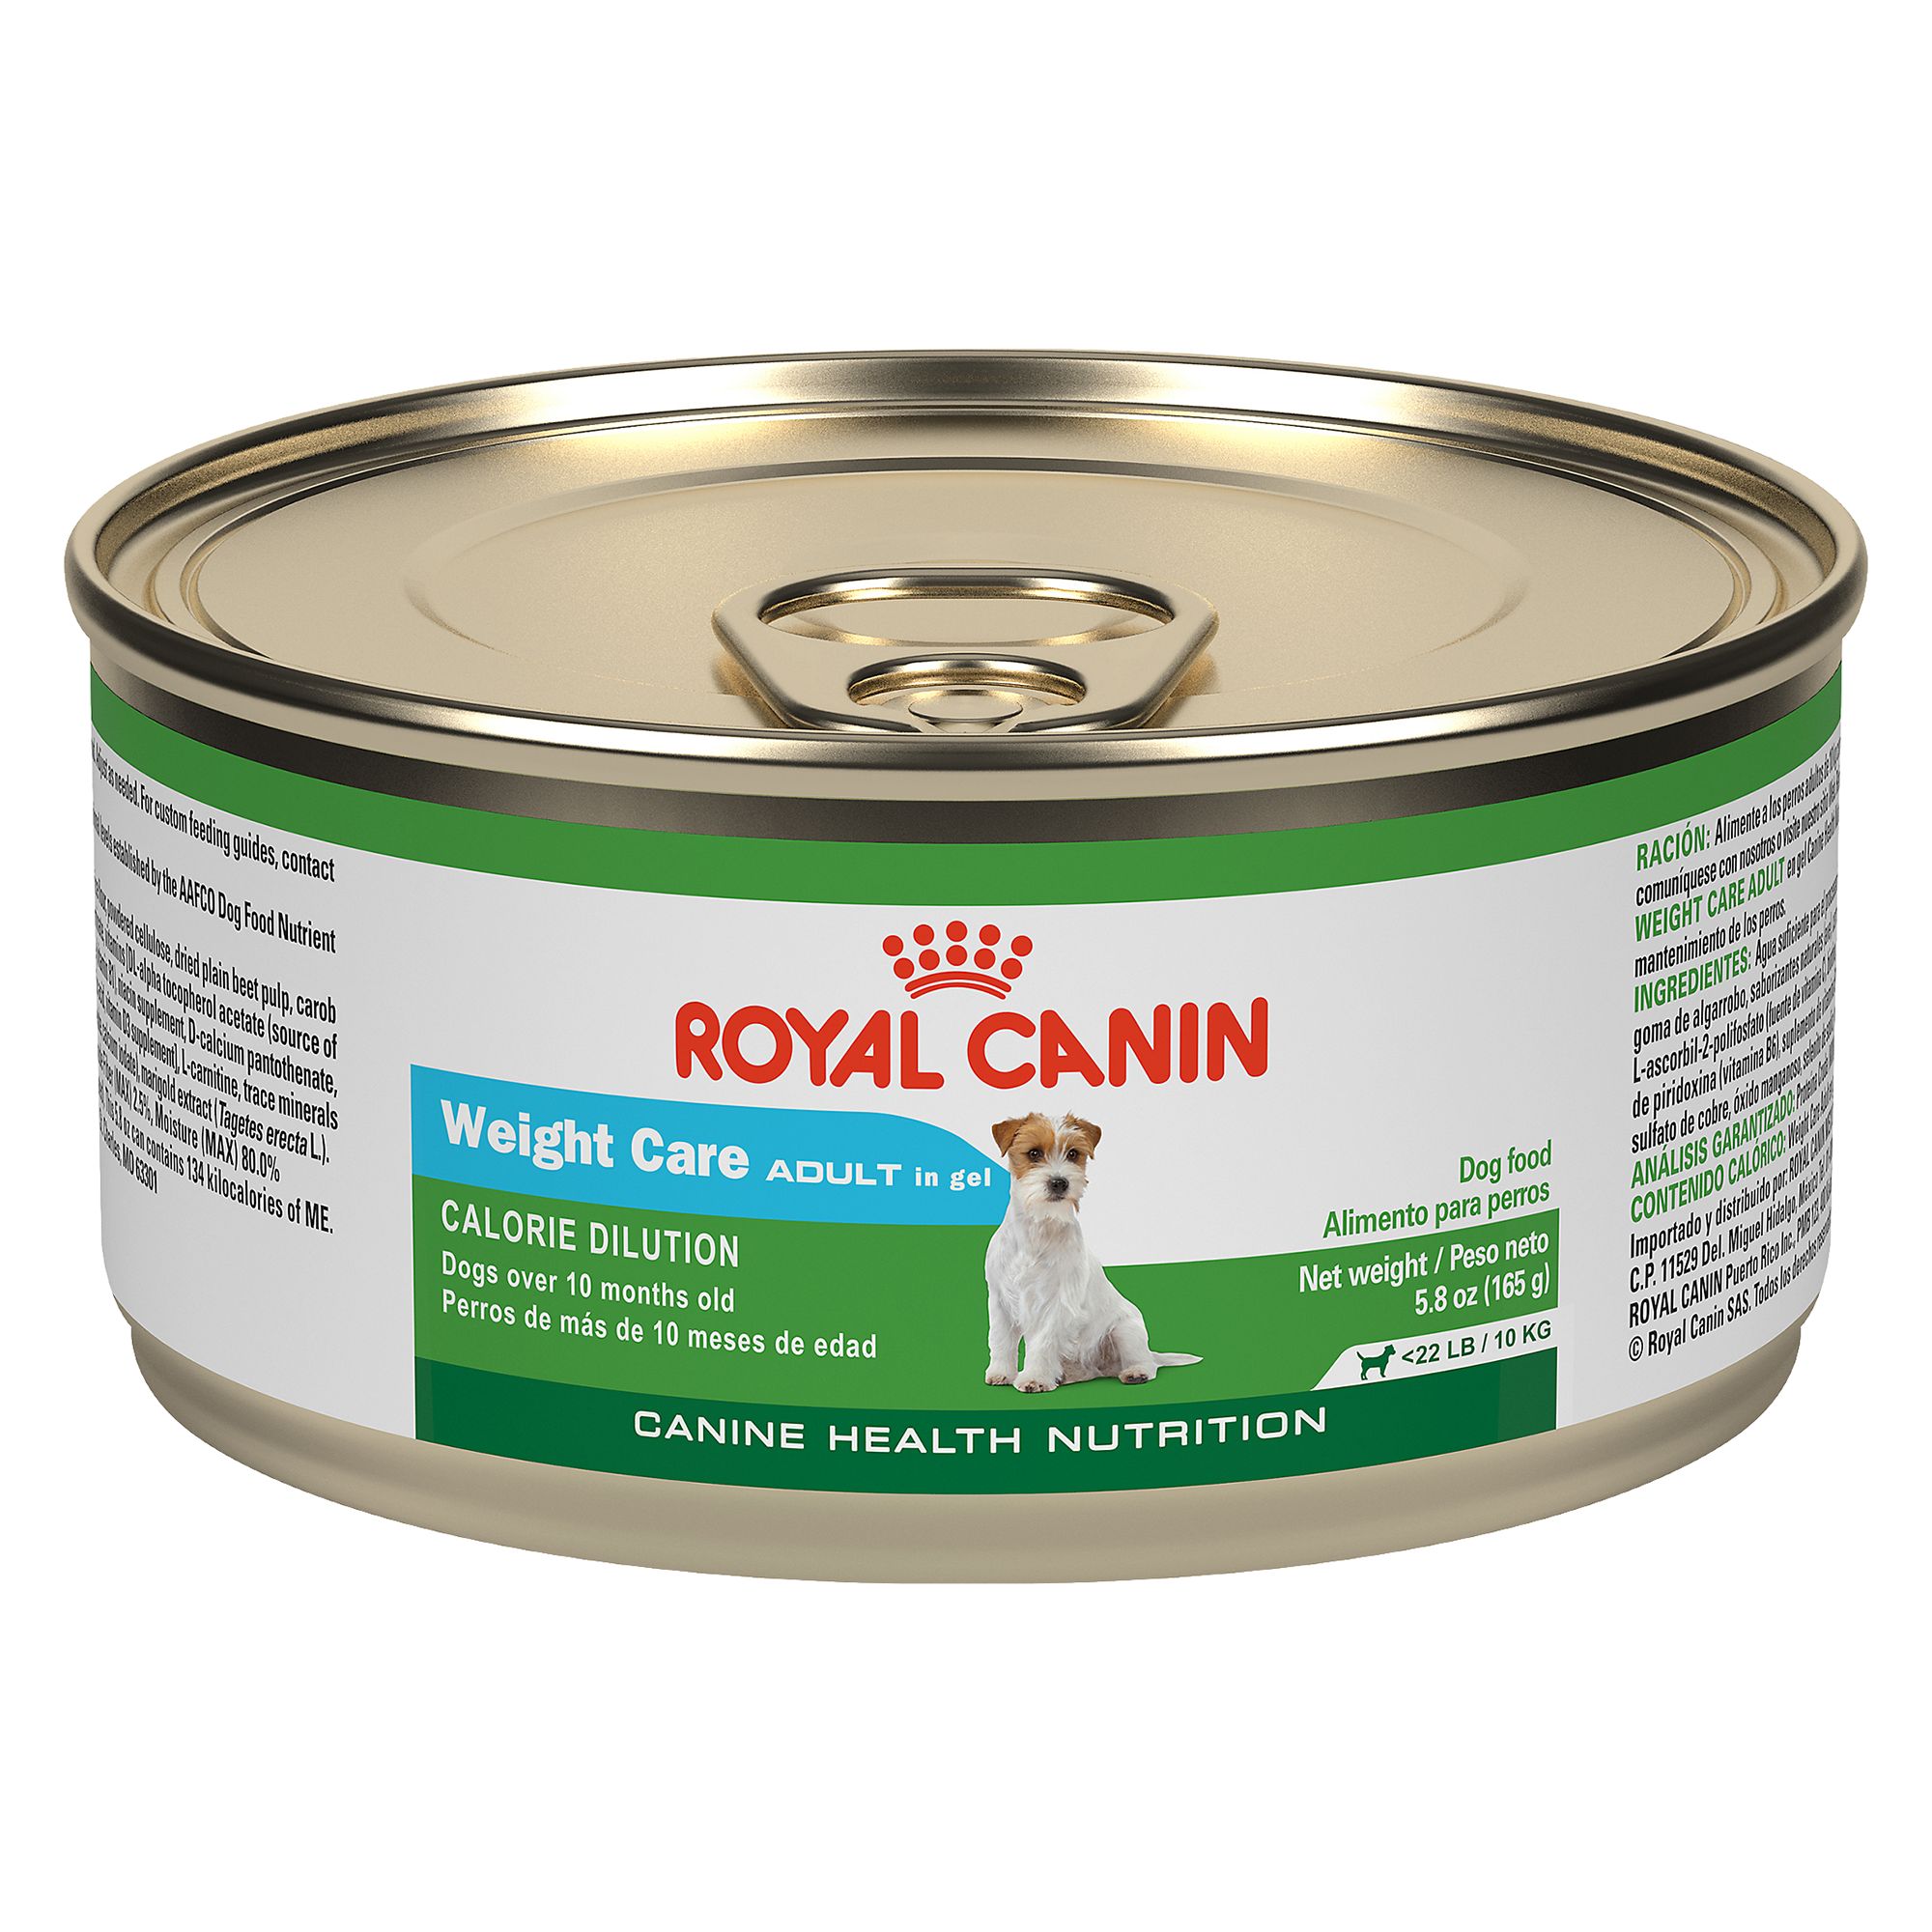 royal canin weight care dog food